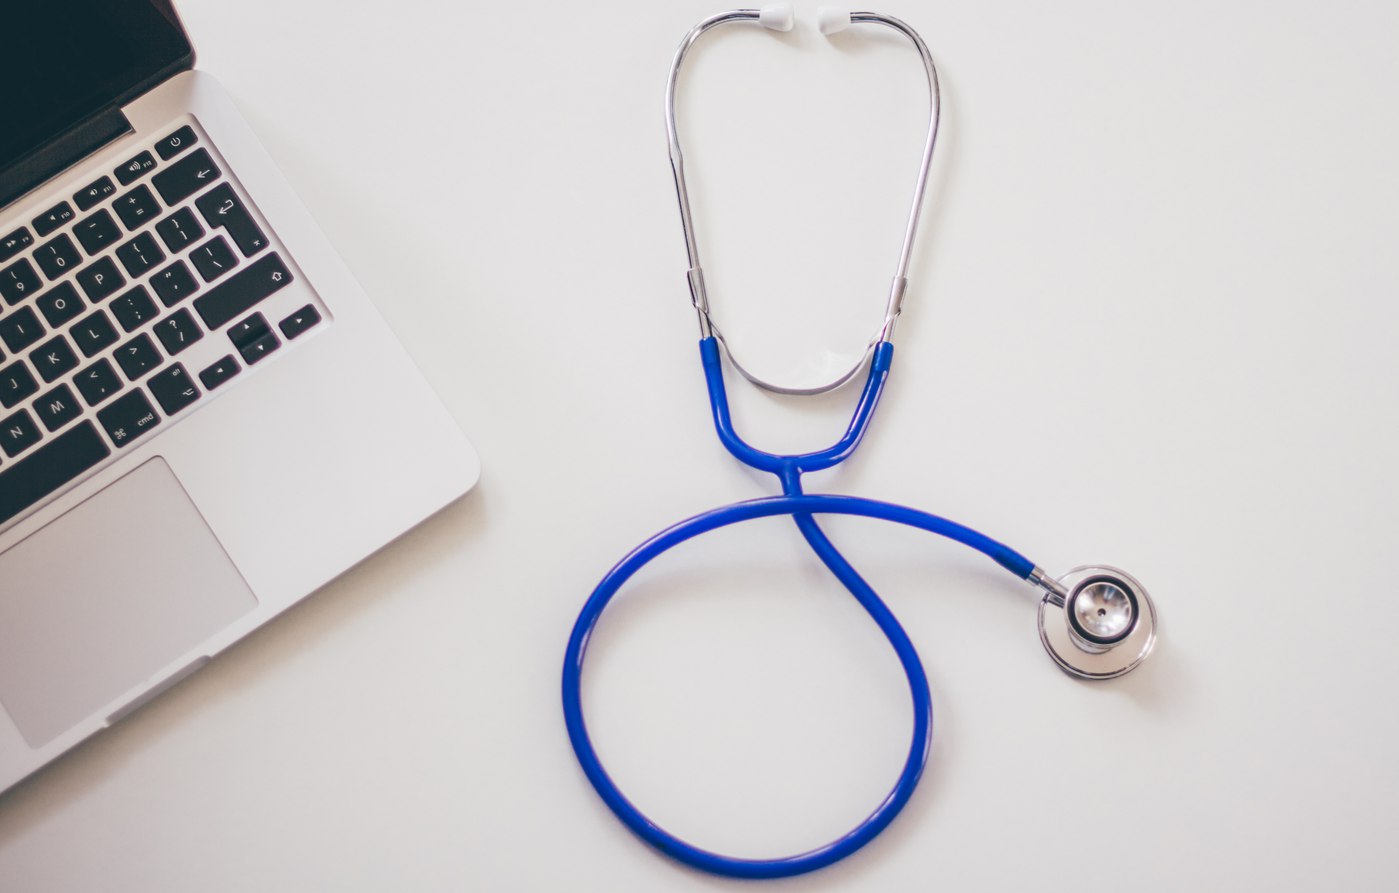 10 Important Facts About the New Health IT SIN